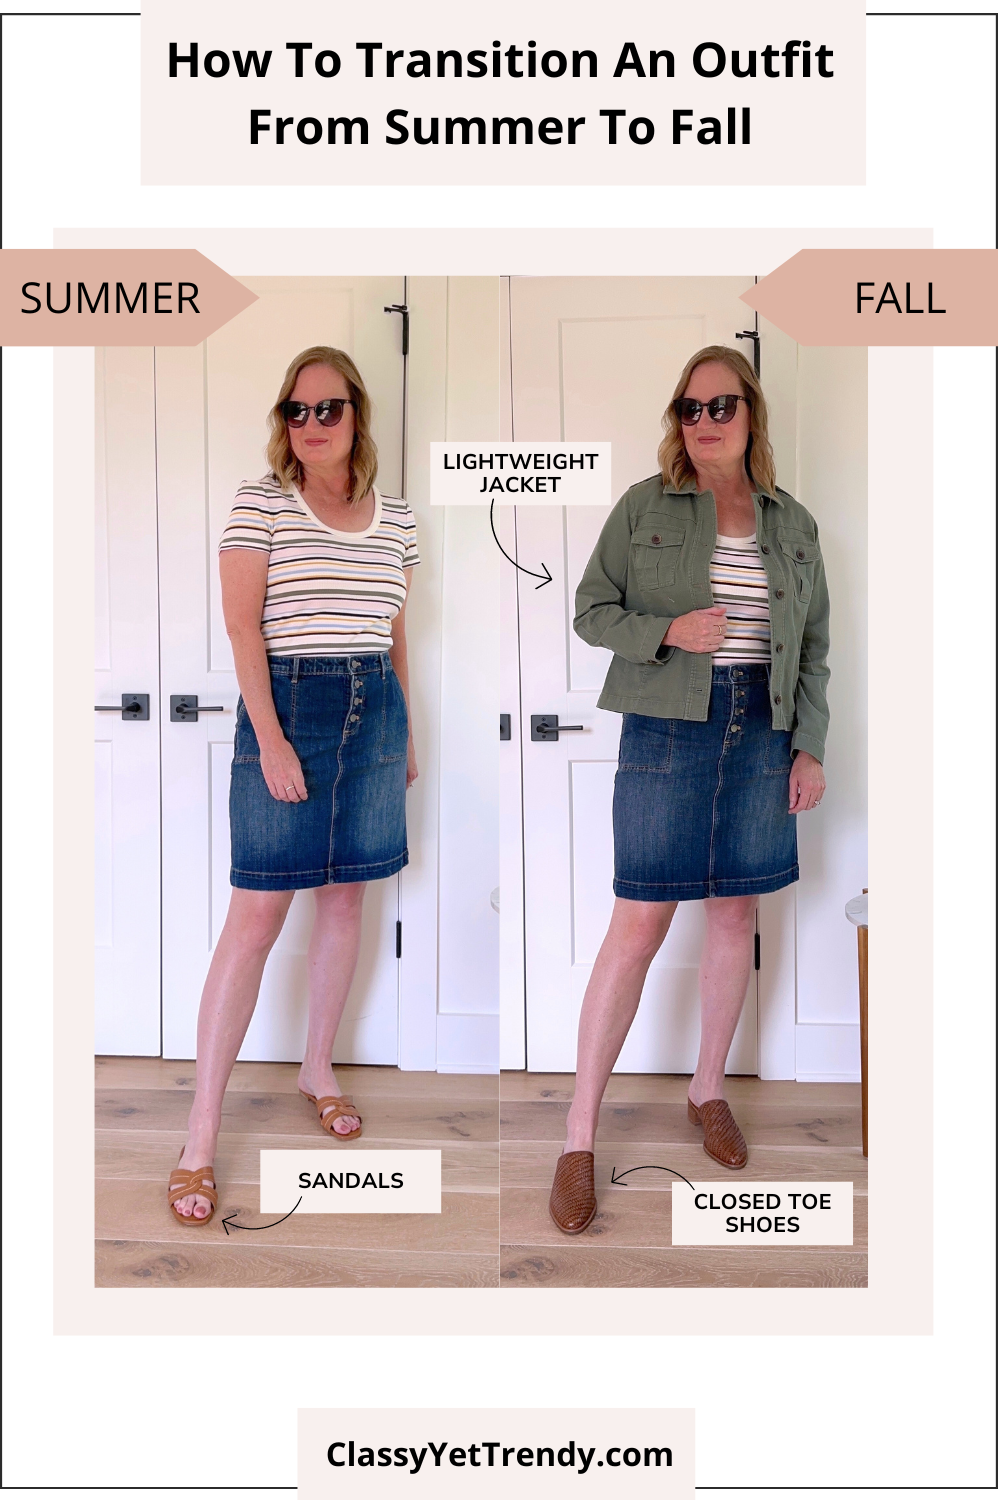 How To Transition An Outfit From Summer To Fall - Classy Yet Trendy